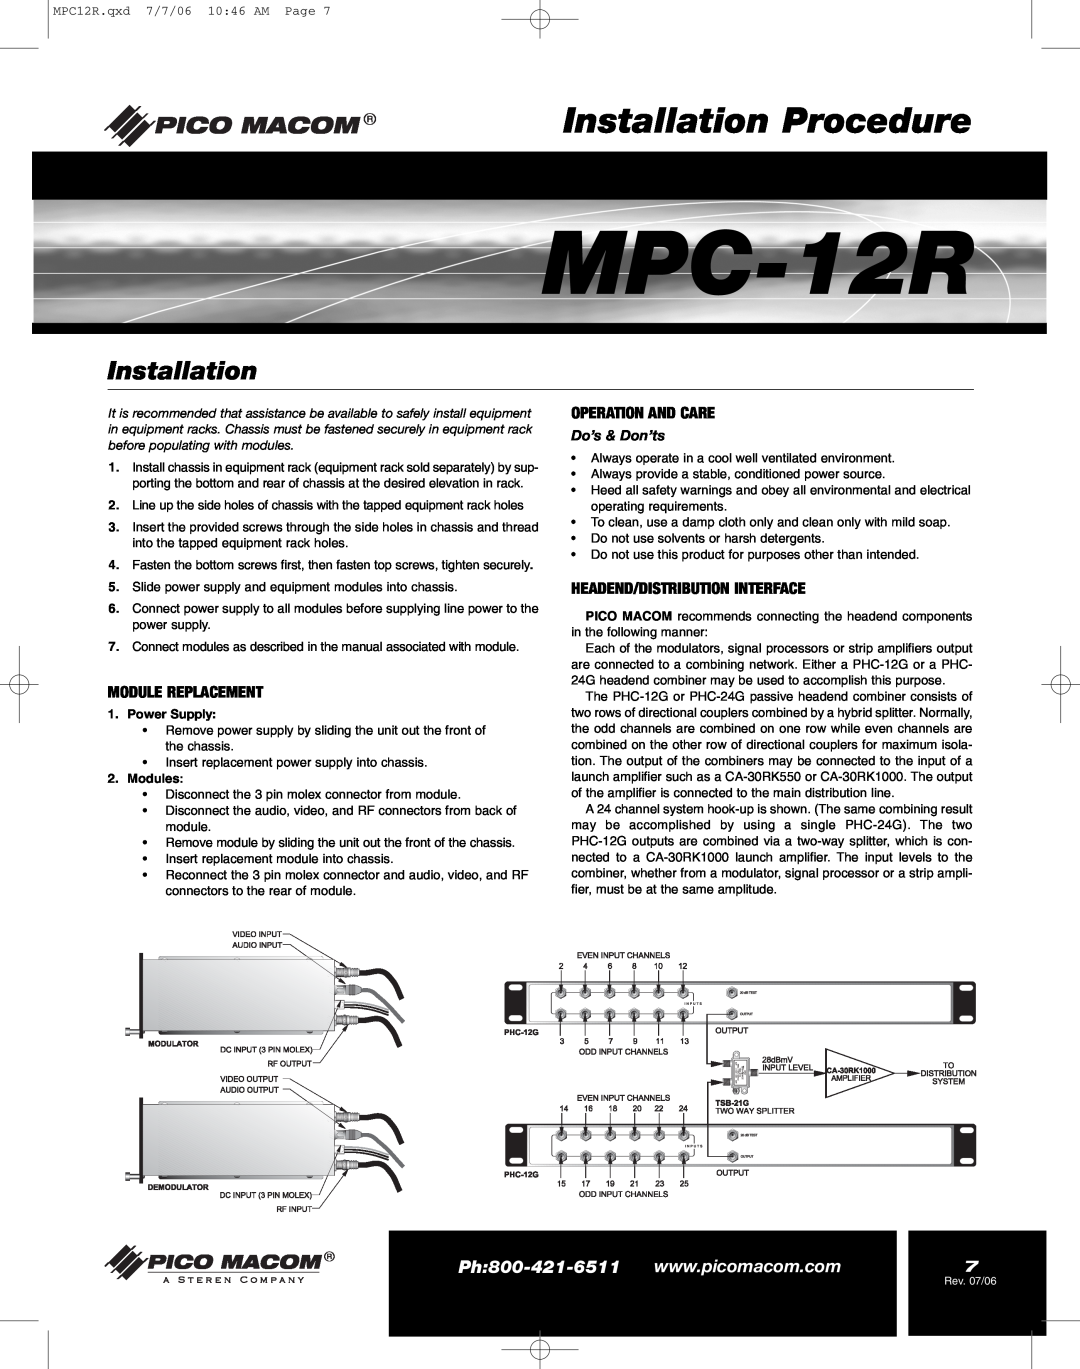 Pico Macom MPC-12R manual Installation Procedure, Module Replacement, Operation And Care, Headend/Distribution Interface 